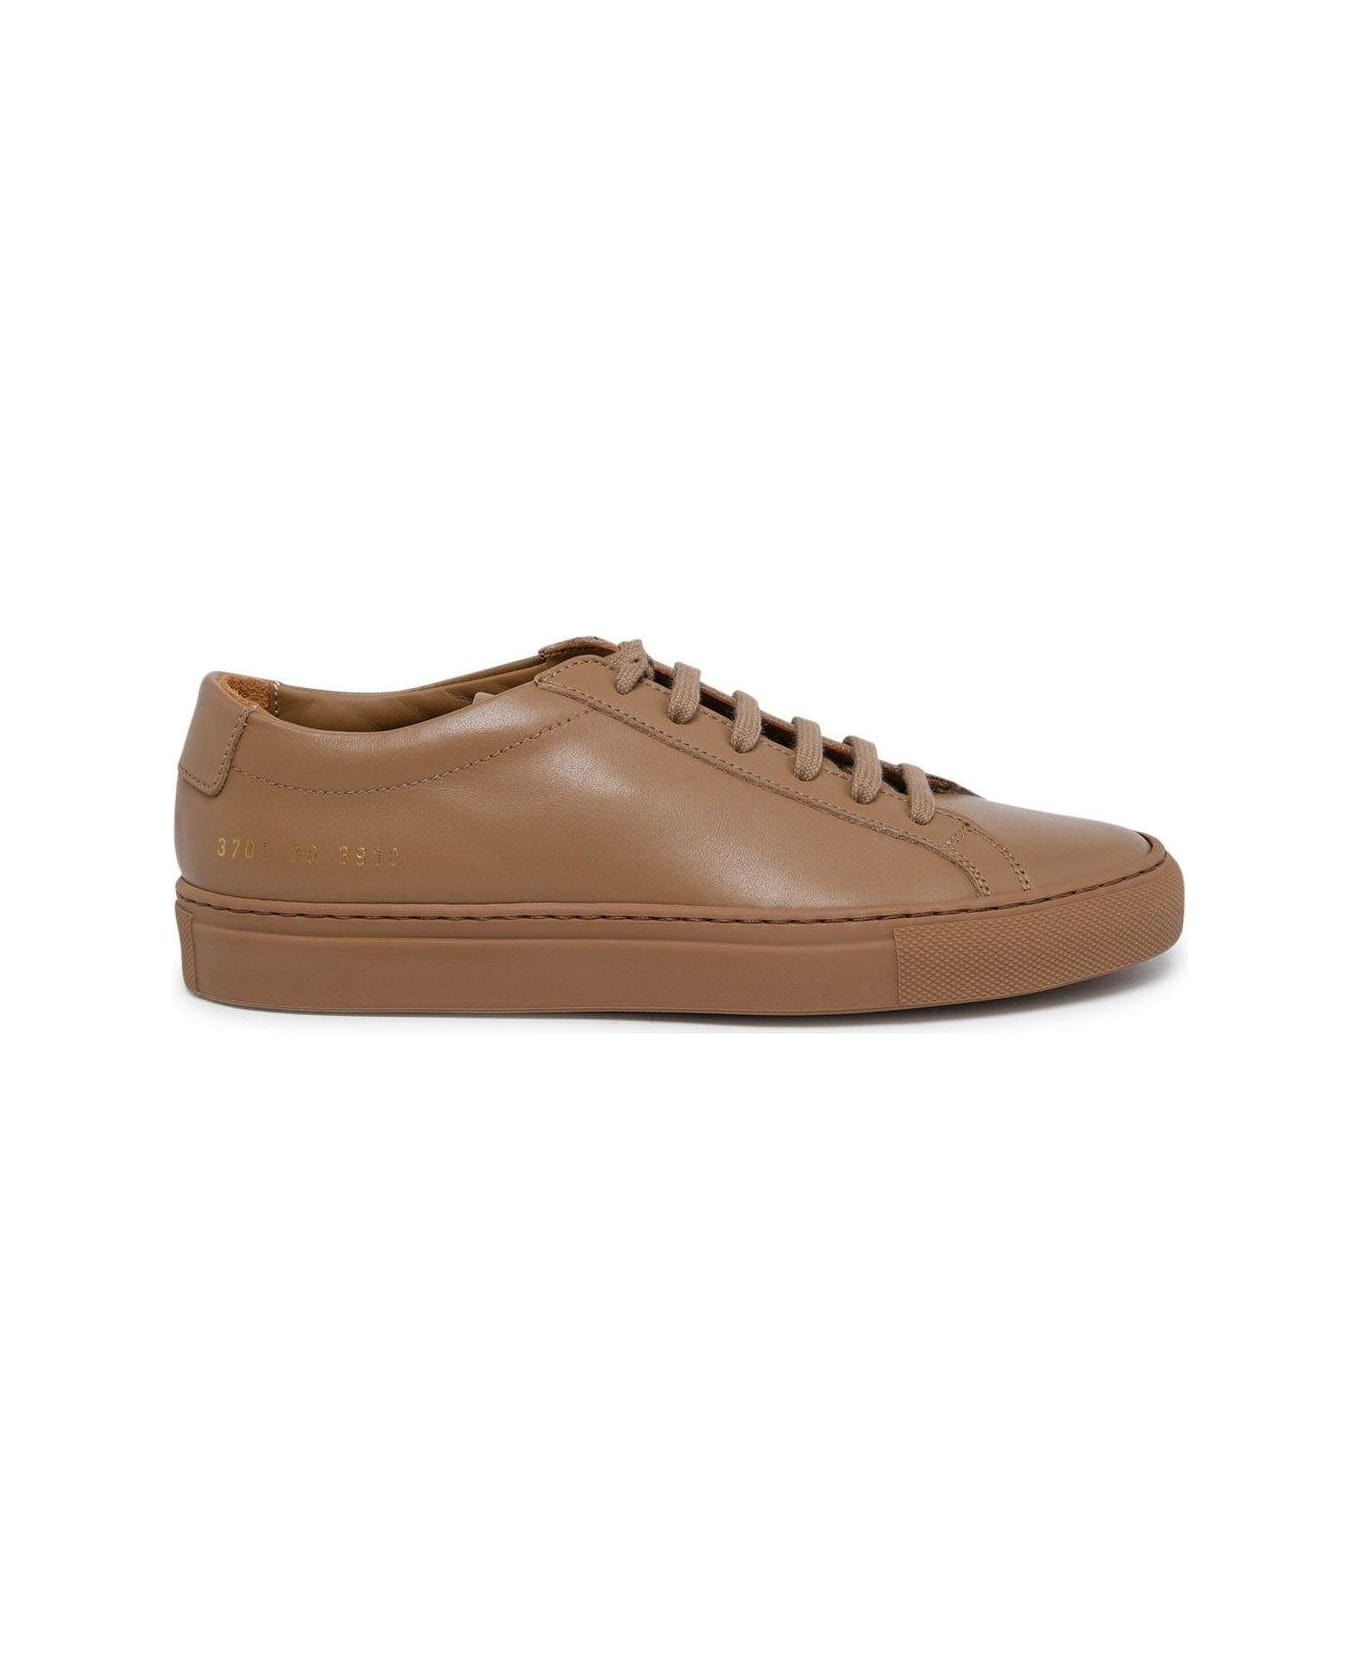 Common Projects Original Achilles Sneakers - BROWN